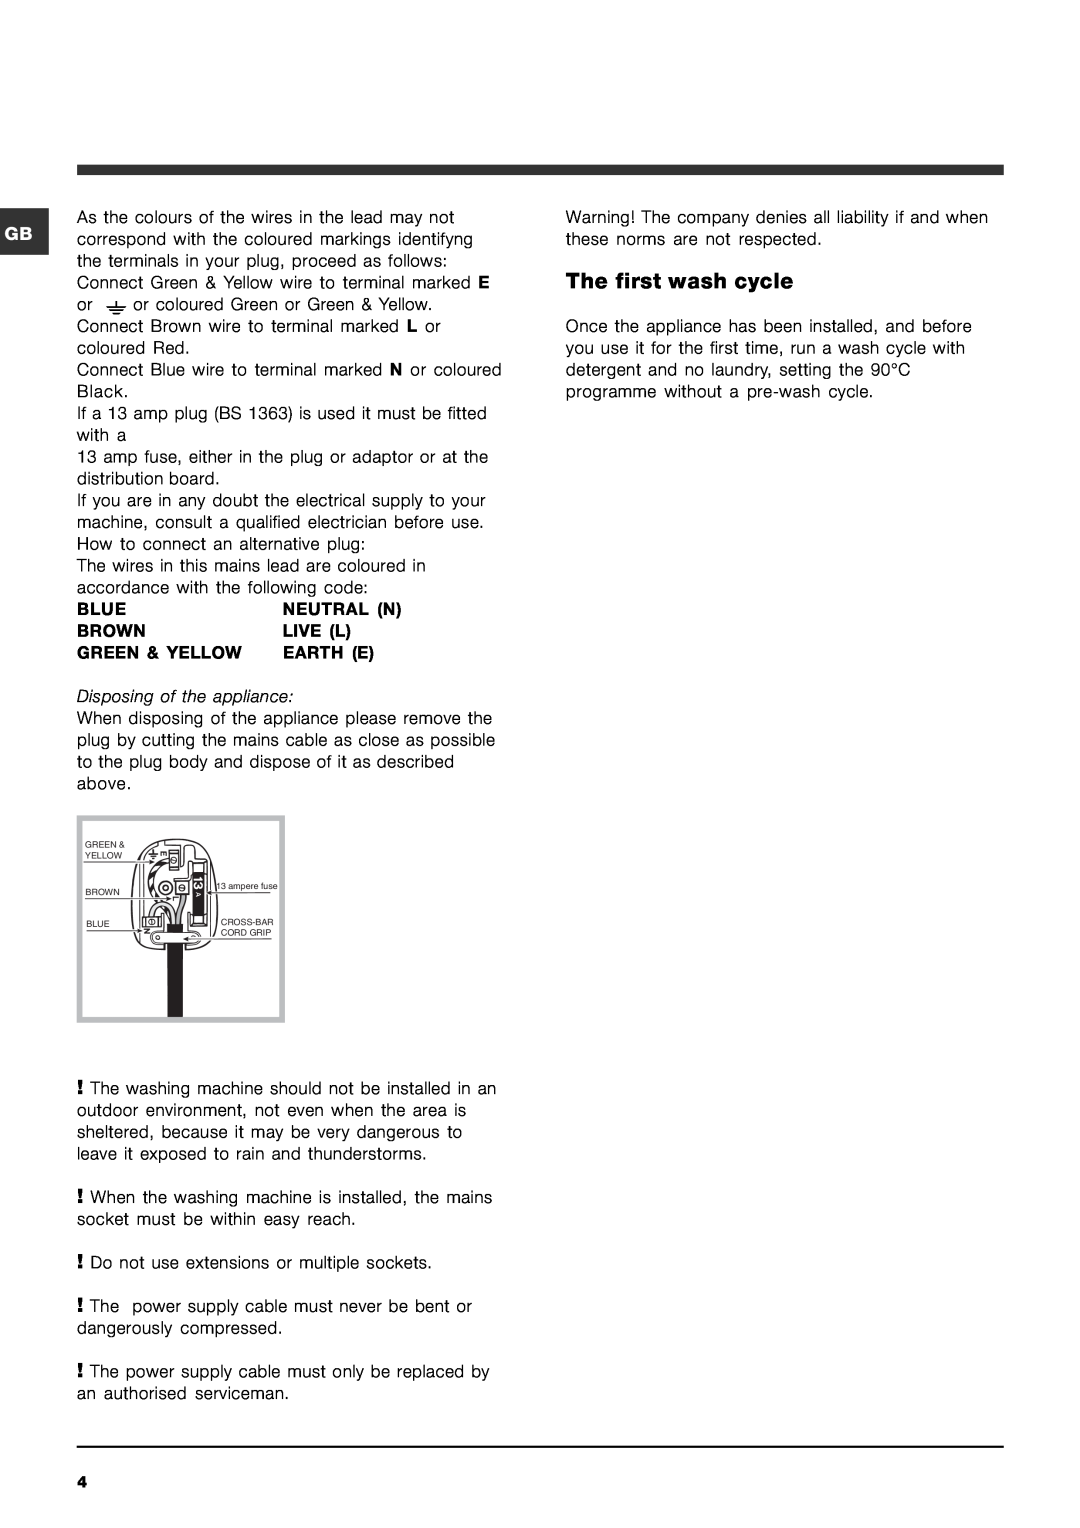 Indesit IWC6145 manual The first wash cycle 